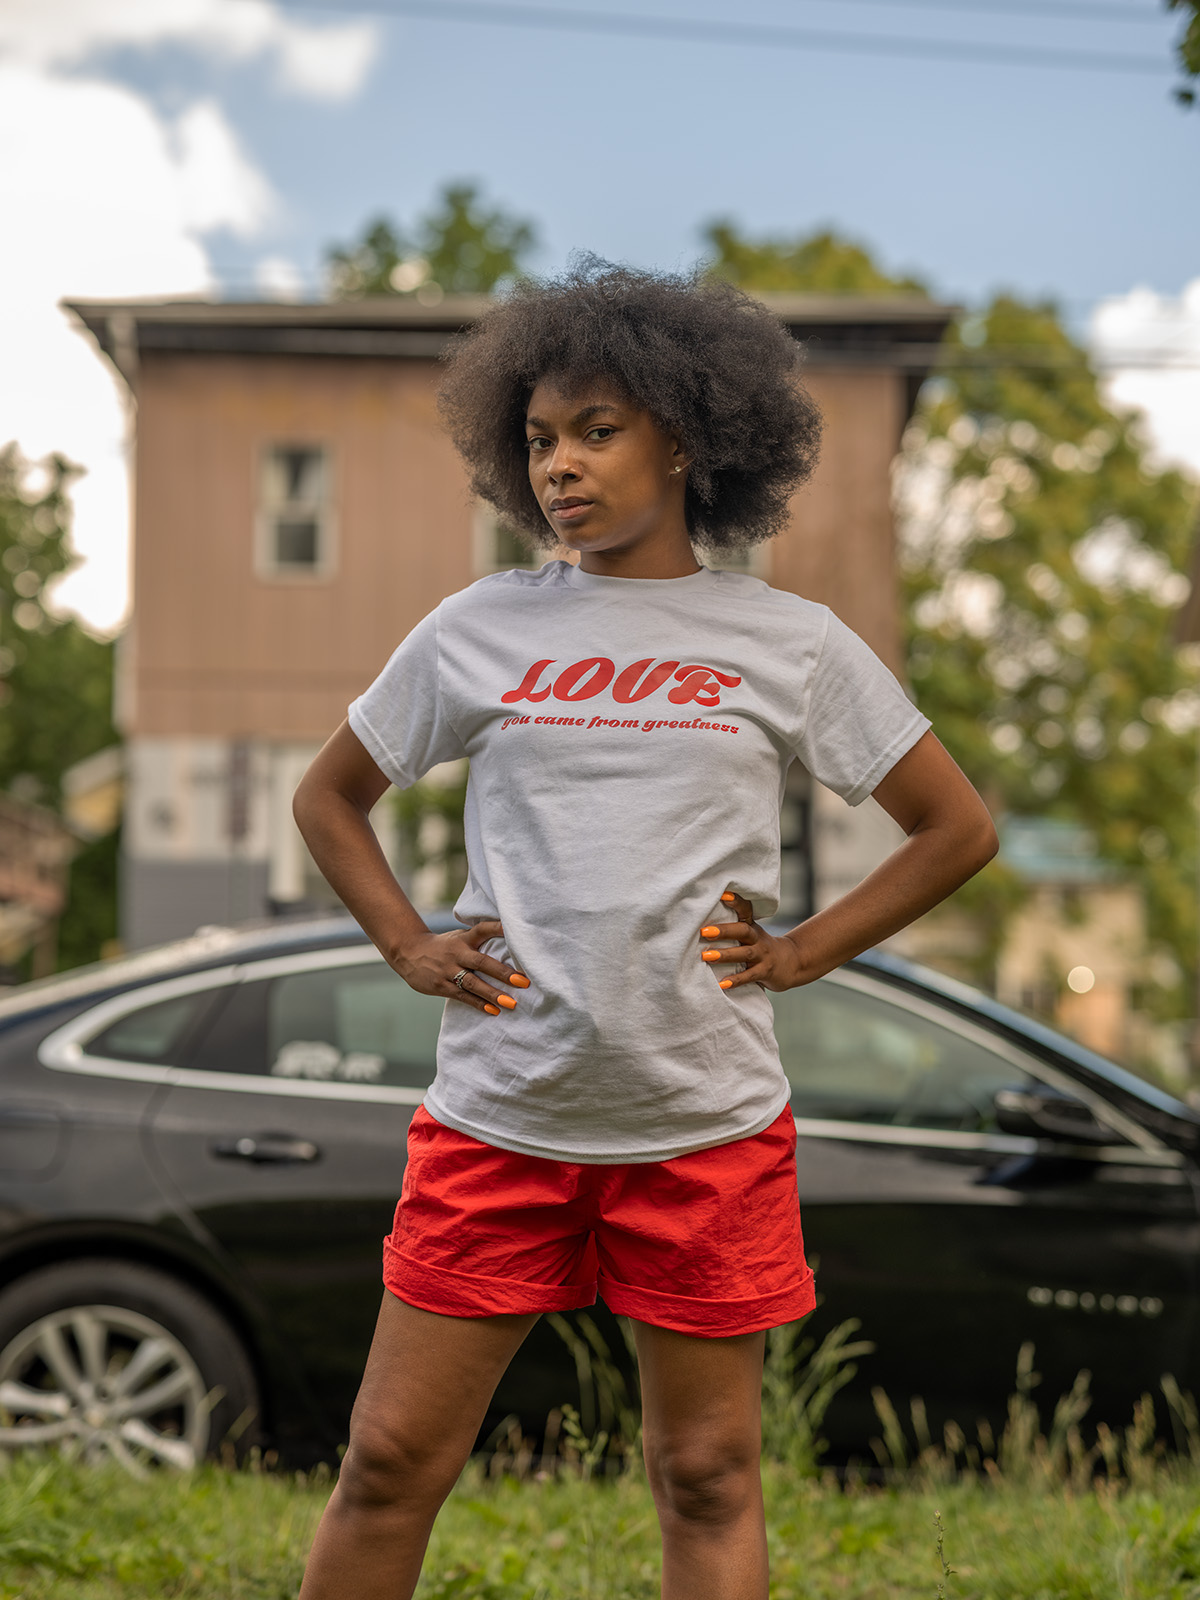 A young Black woman in shorts and a T-shirt stands outside in front of a black car